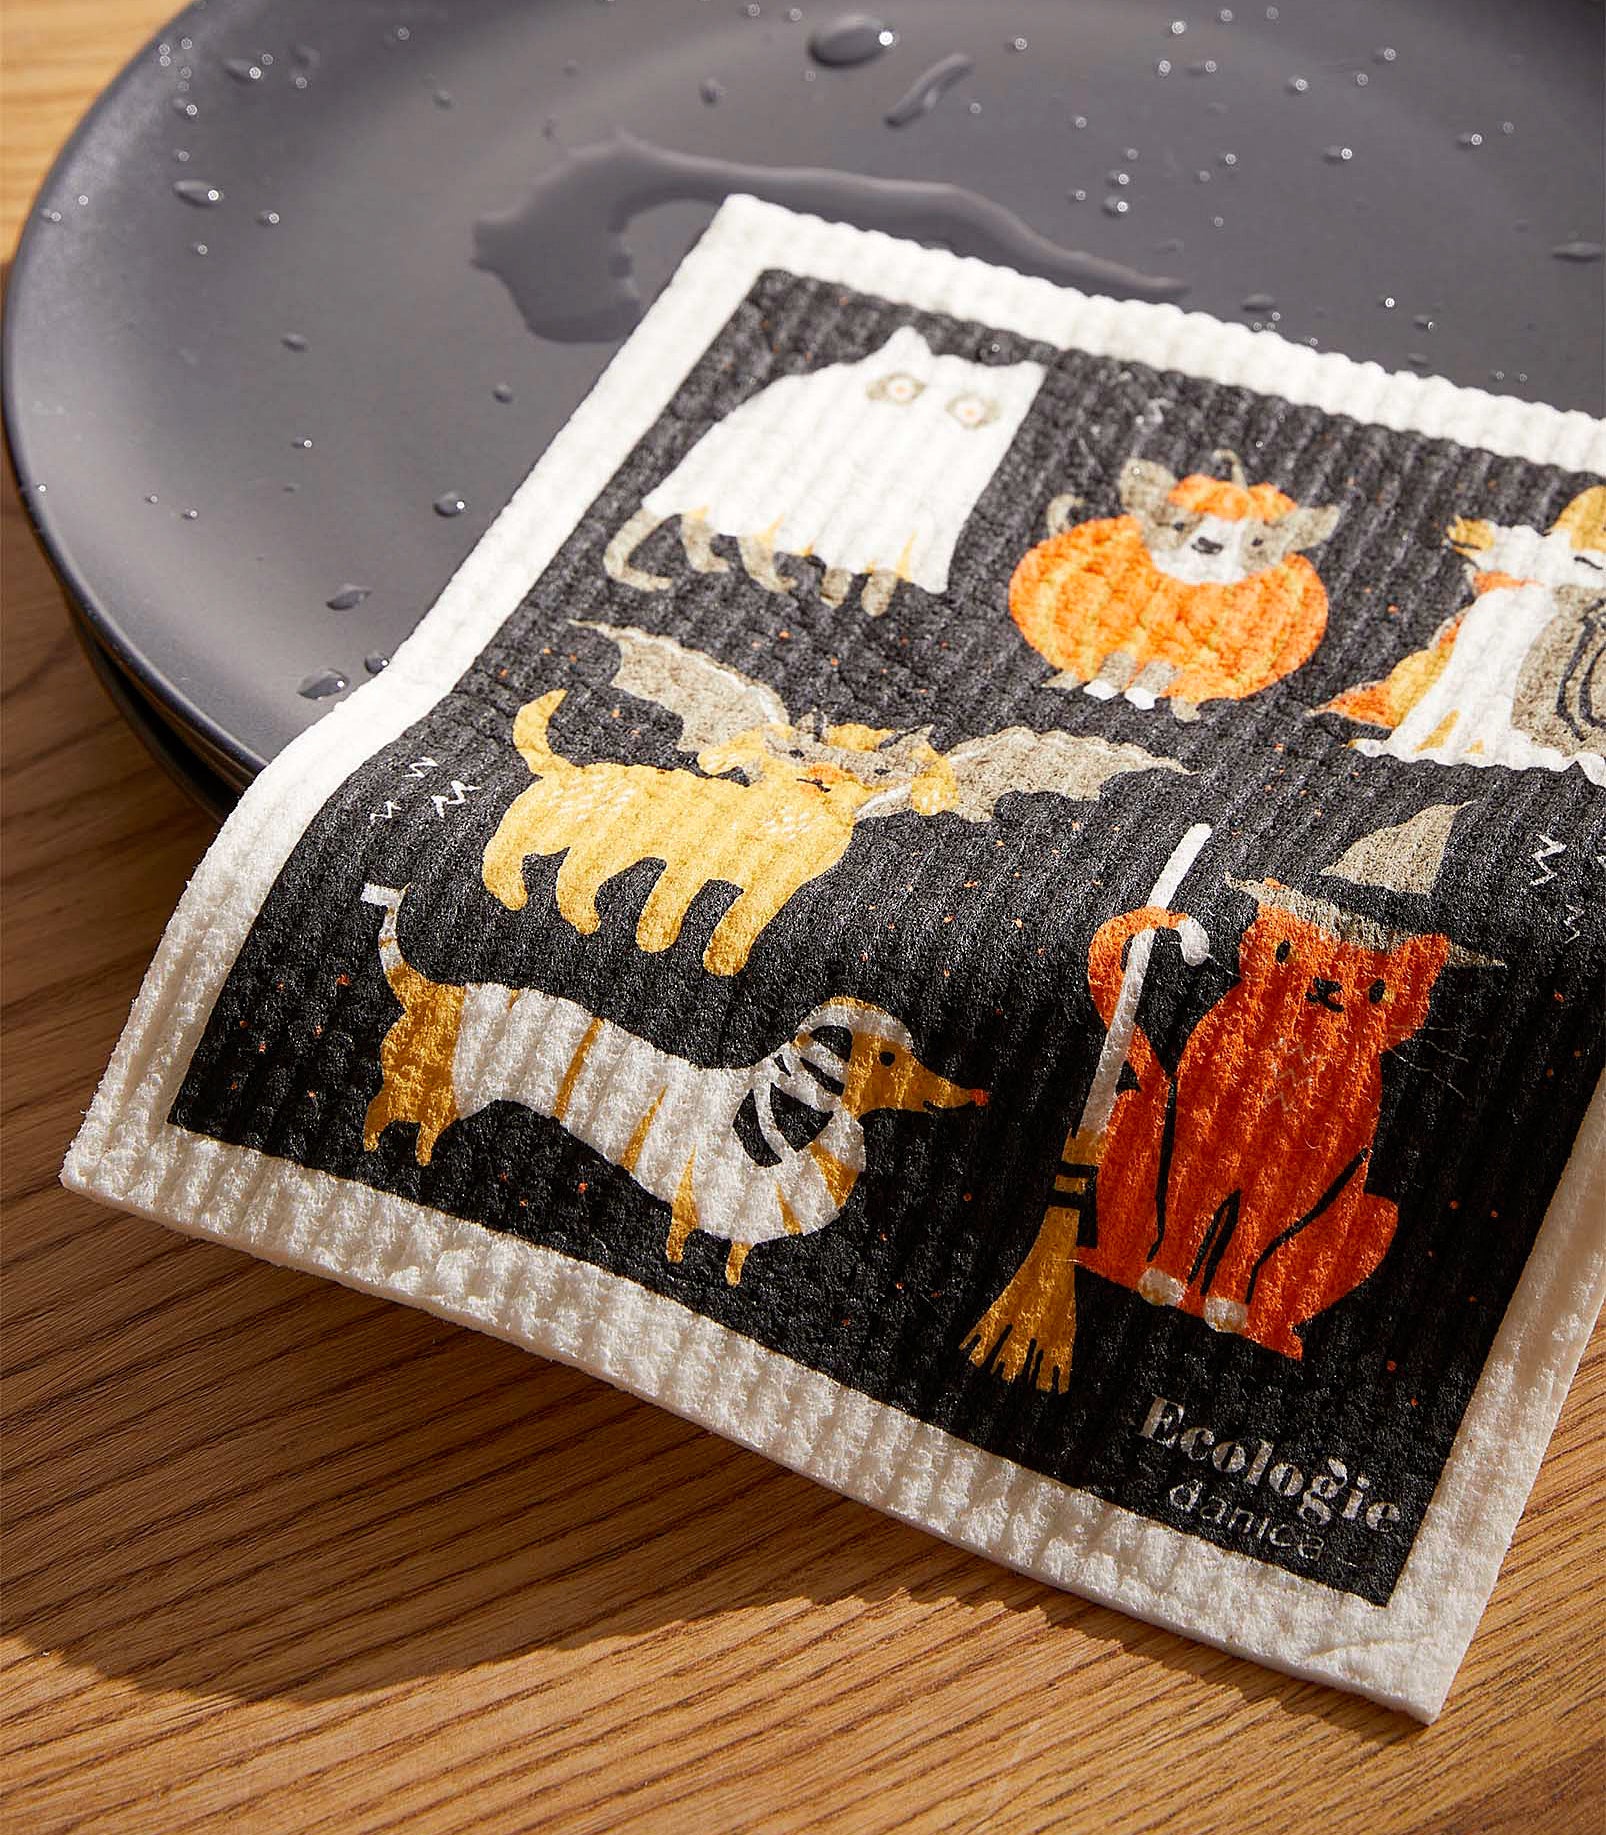 a sponge with animals wearing costumes illustrated on it